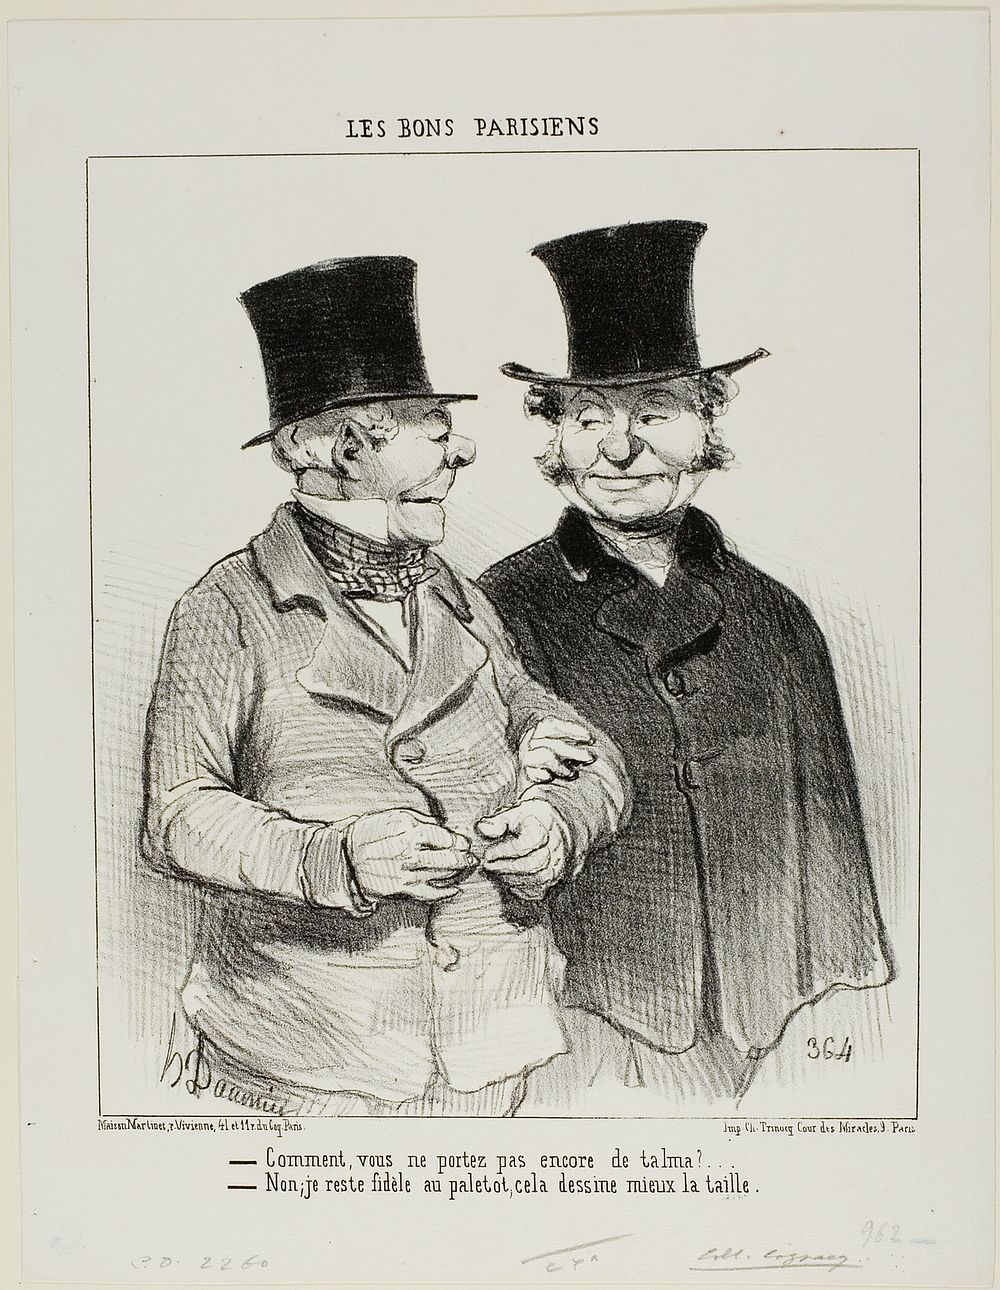 “- You are not wearing a Talma yet? - No, I remain loyal to the overcoat, it's more flattering to my waistline,” plate 1…